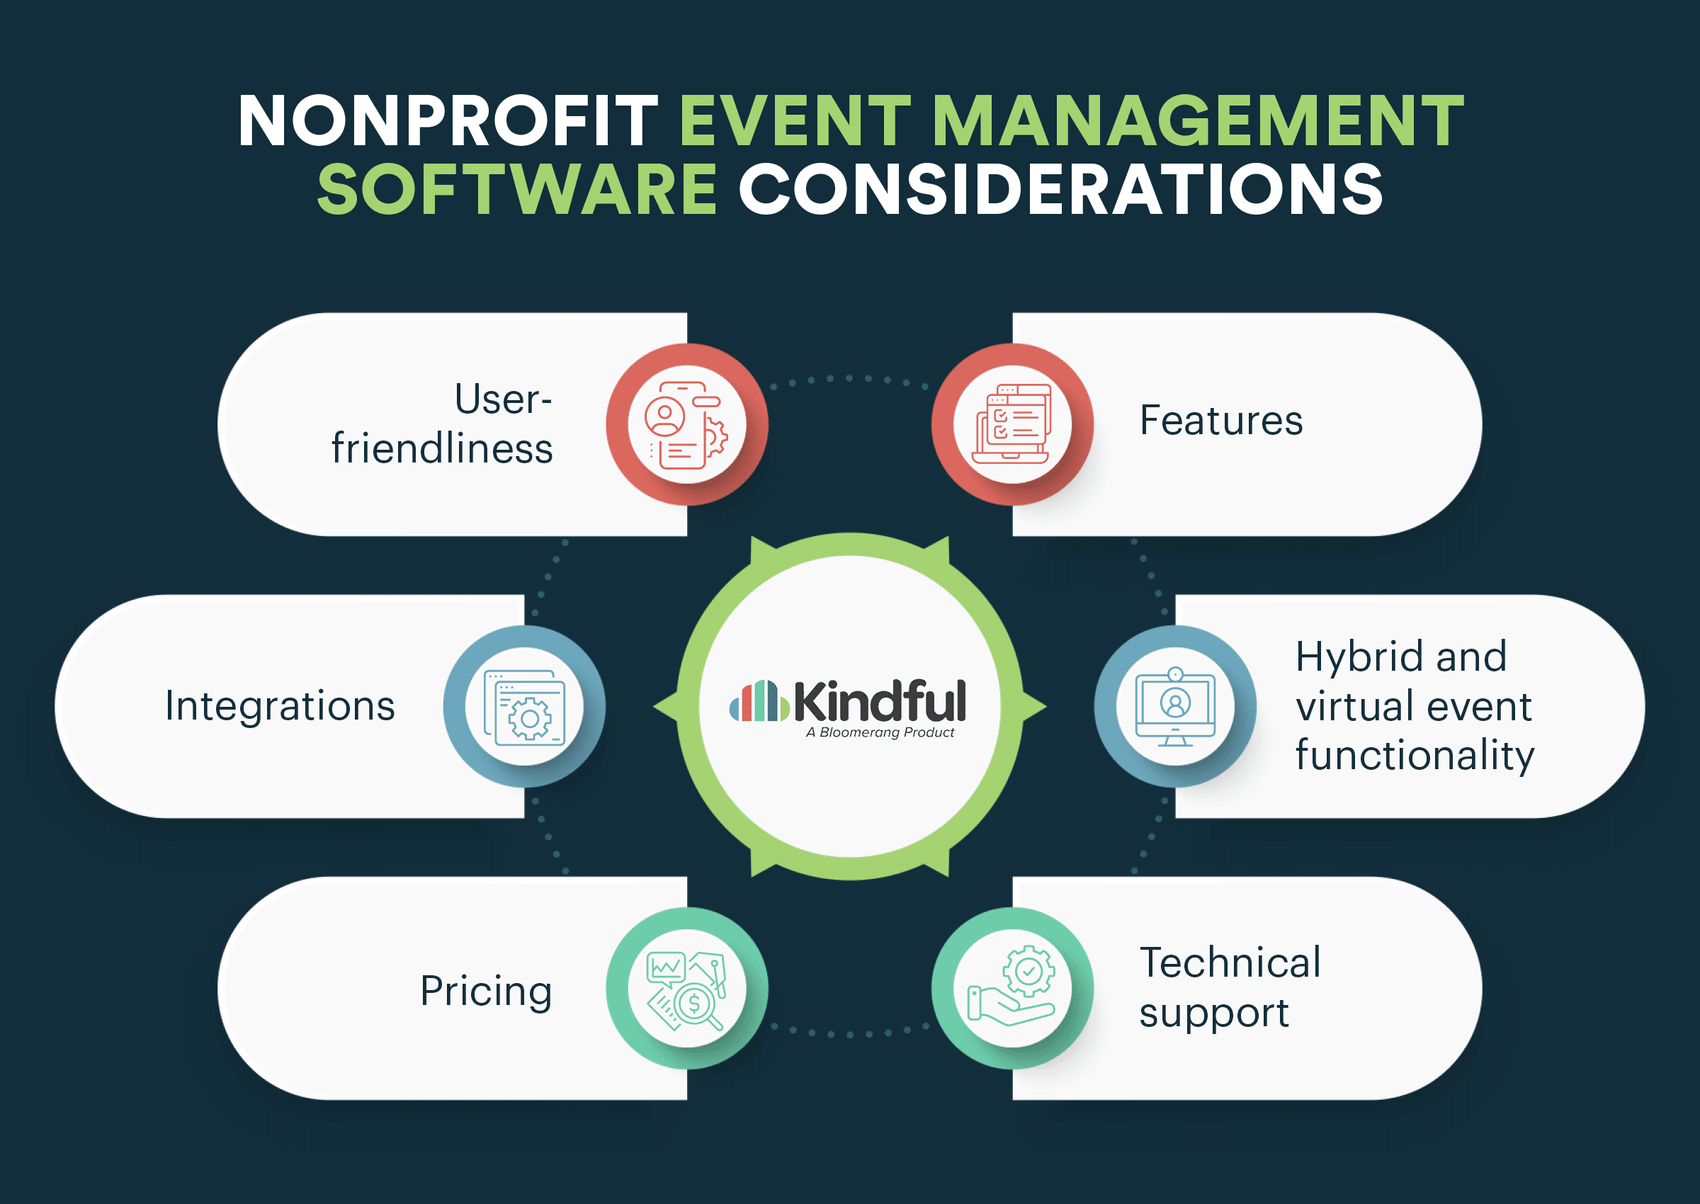 Nonprofit event management software considerations (some listed above; also includes elements like pricing and hybrid and virtual functionality) 